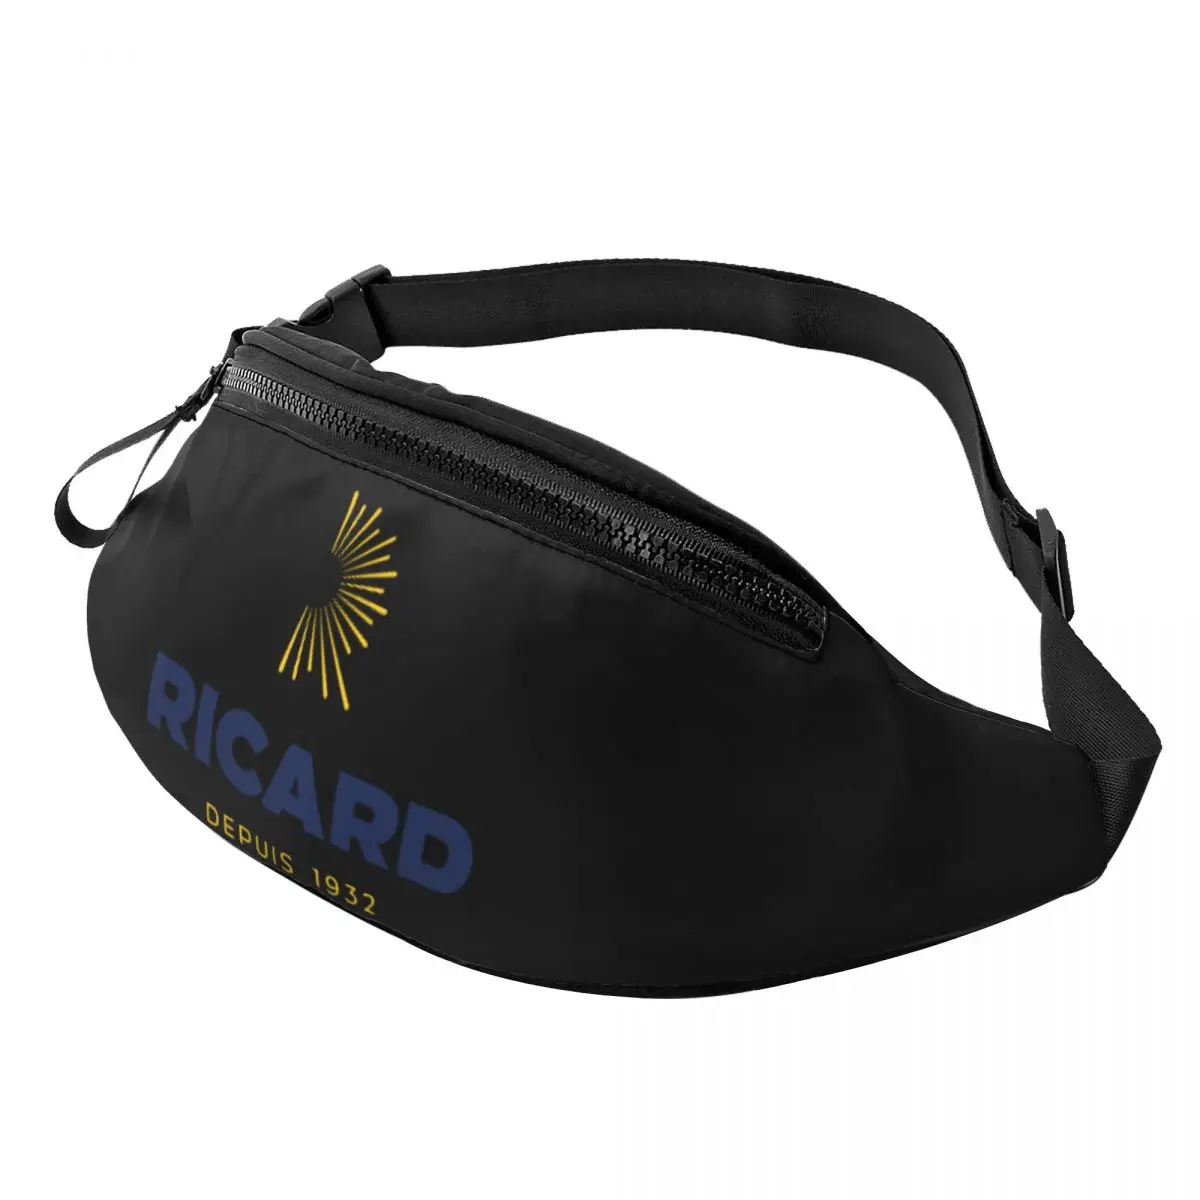 

Cool Ricards Fanny Pack for Cycling Camping Women Men Crossbody Waist Bag Phone Money Pouch